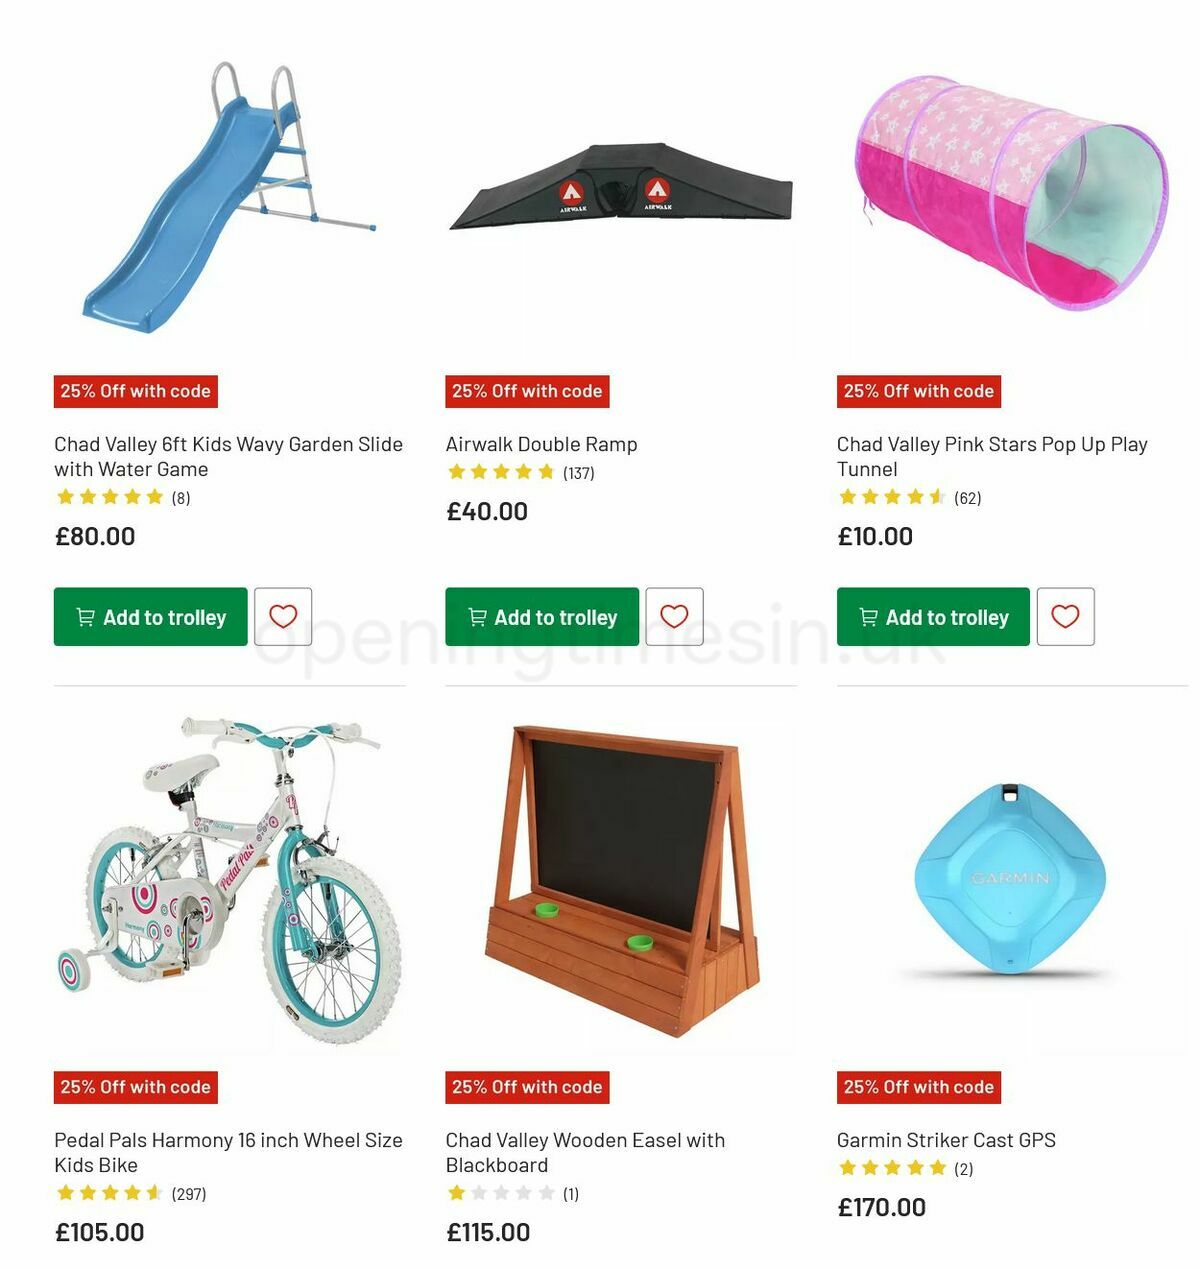 Argos Offers from 15 February